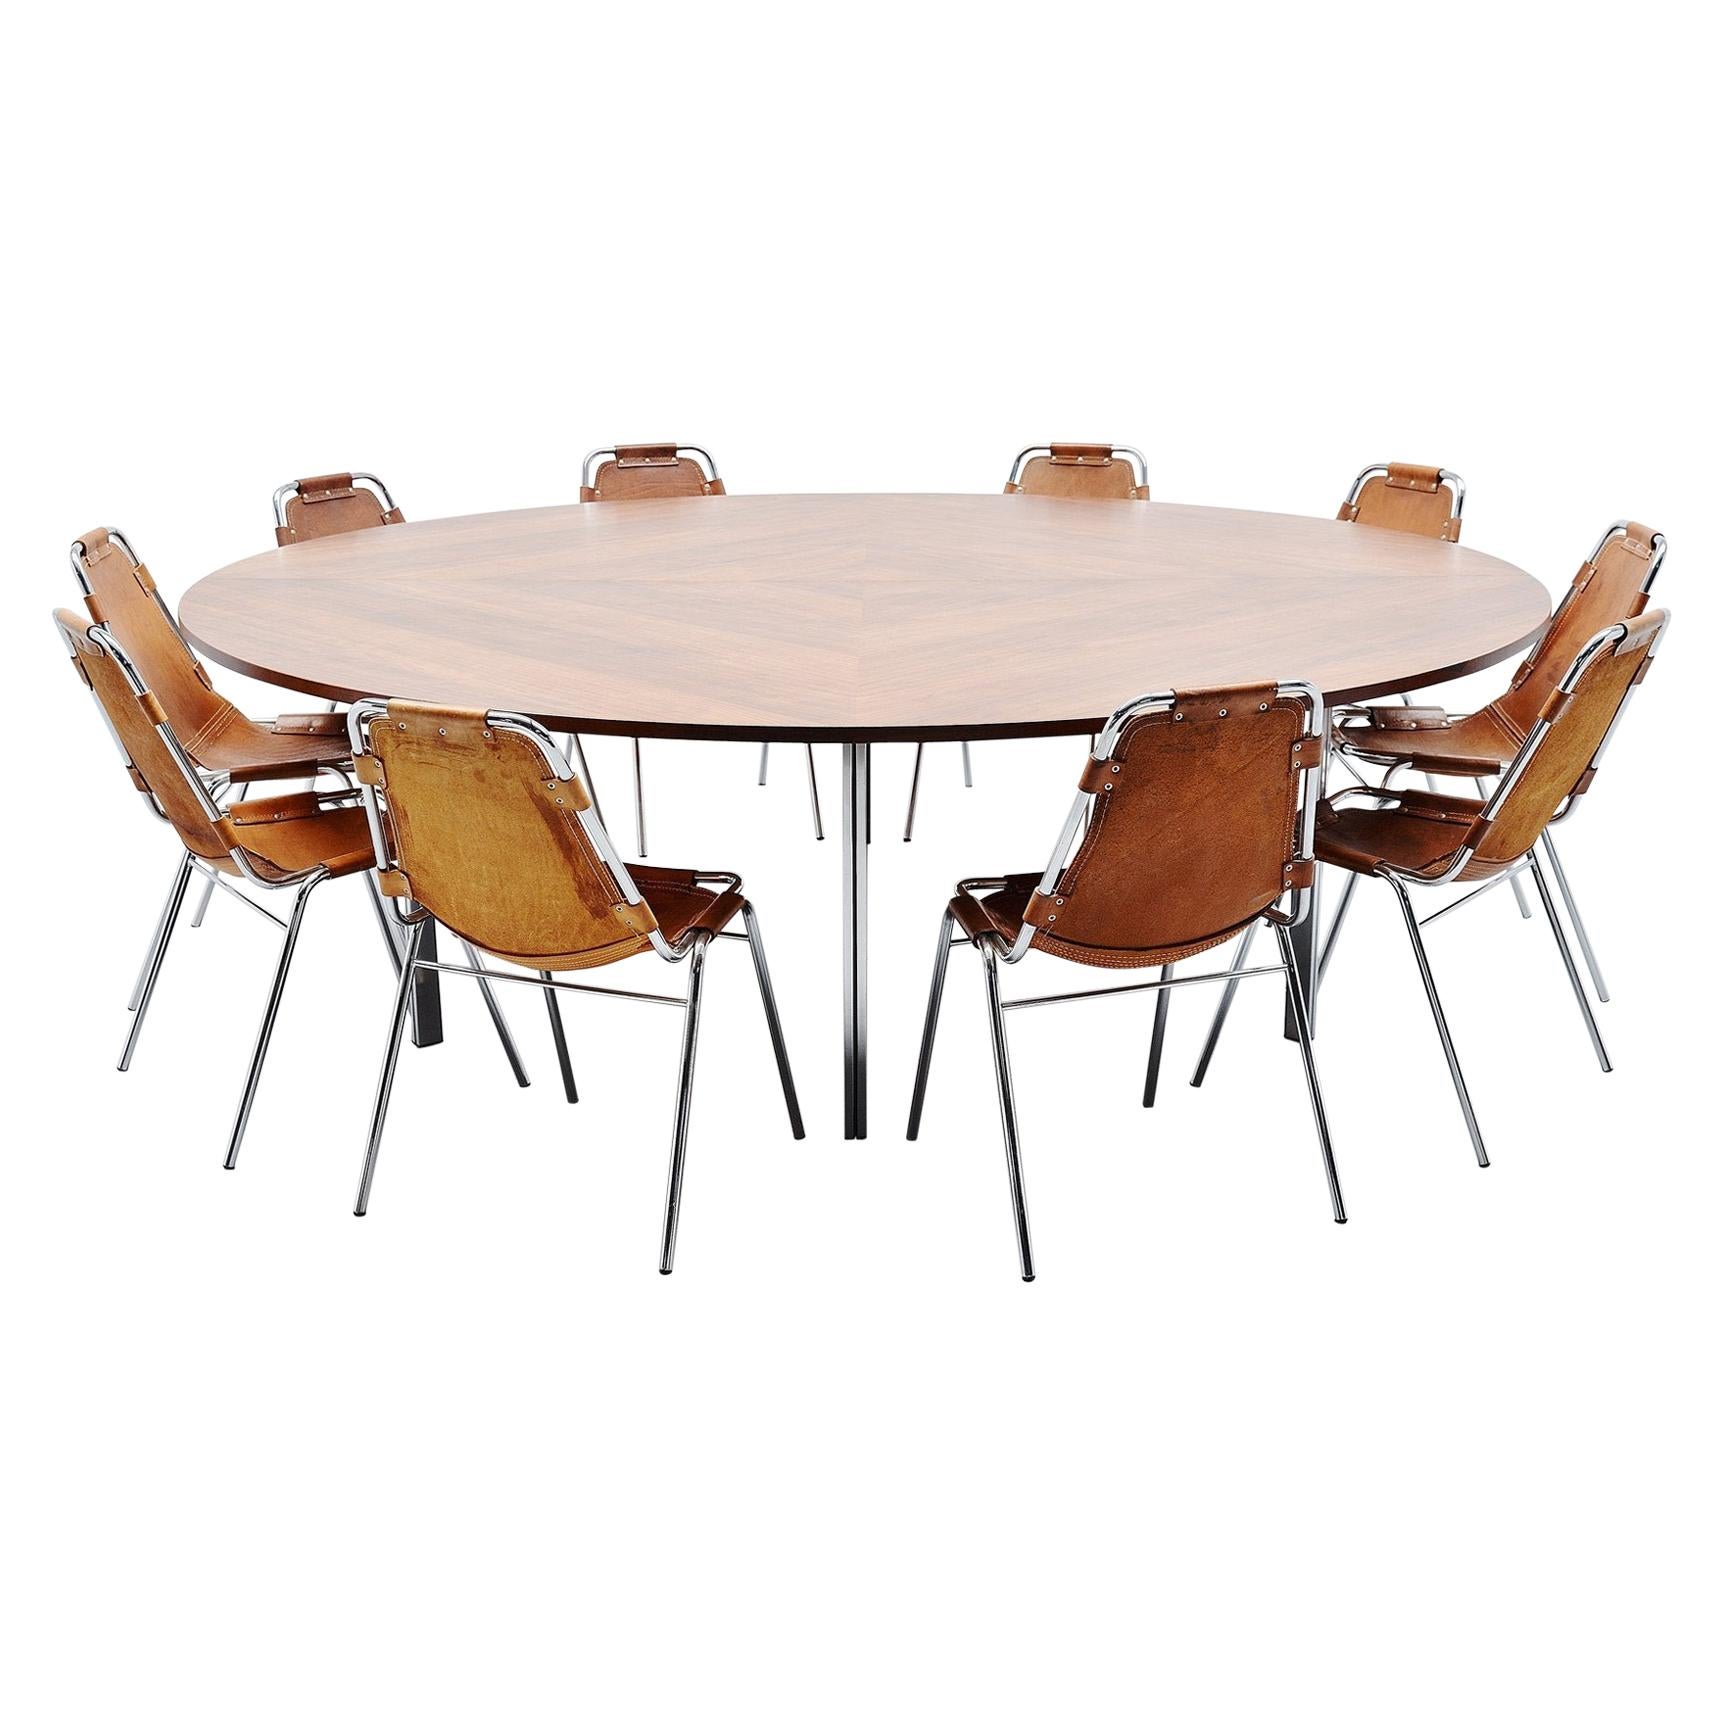 Large Round Conference Table Florence Knoll International Style, 1960